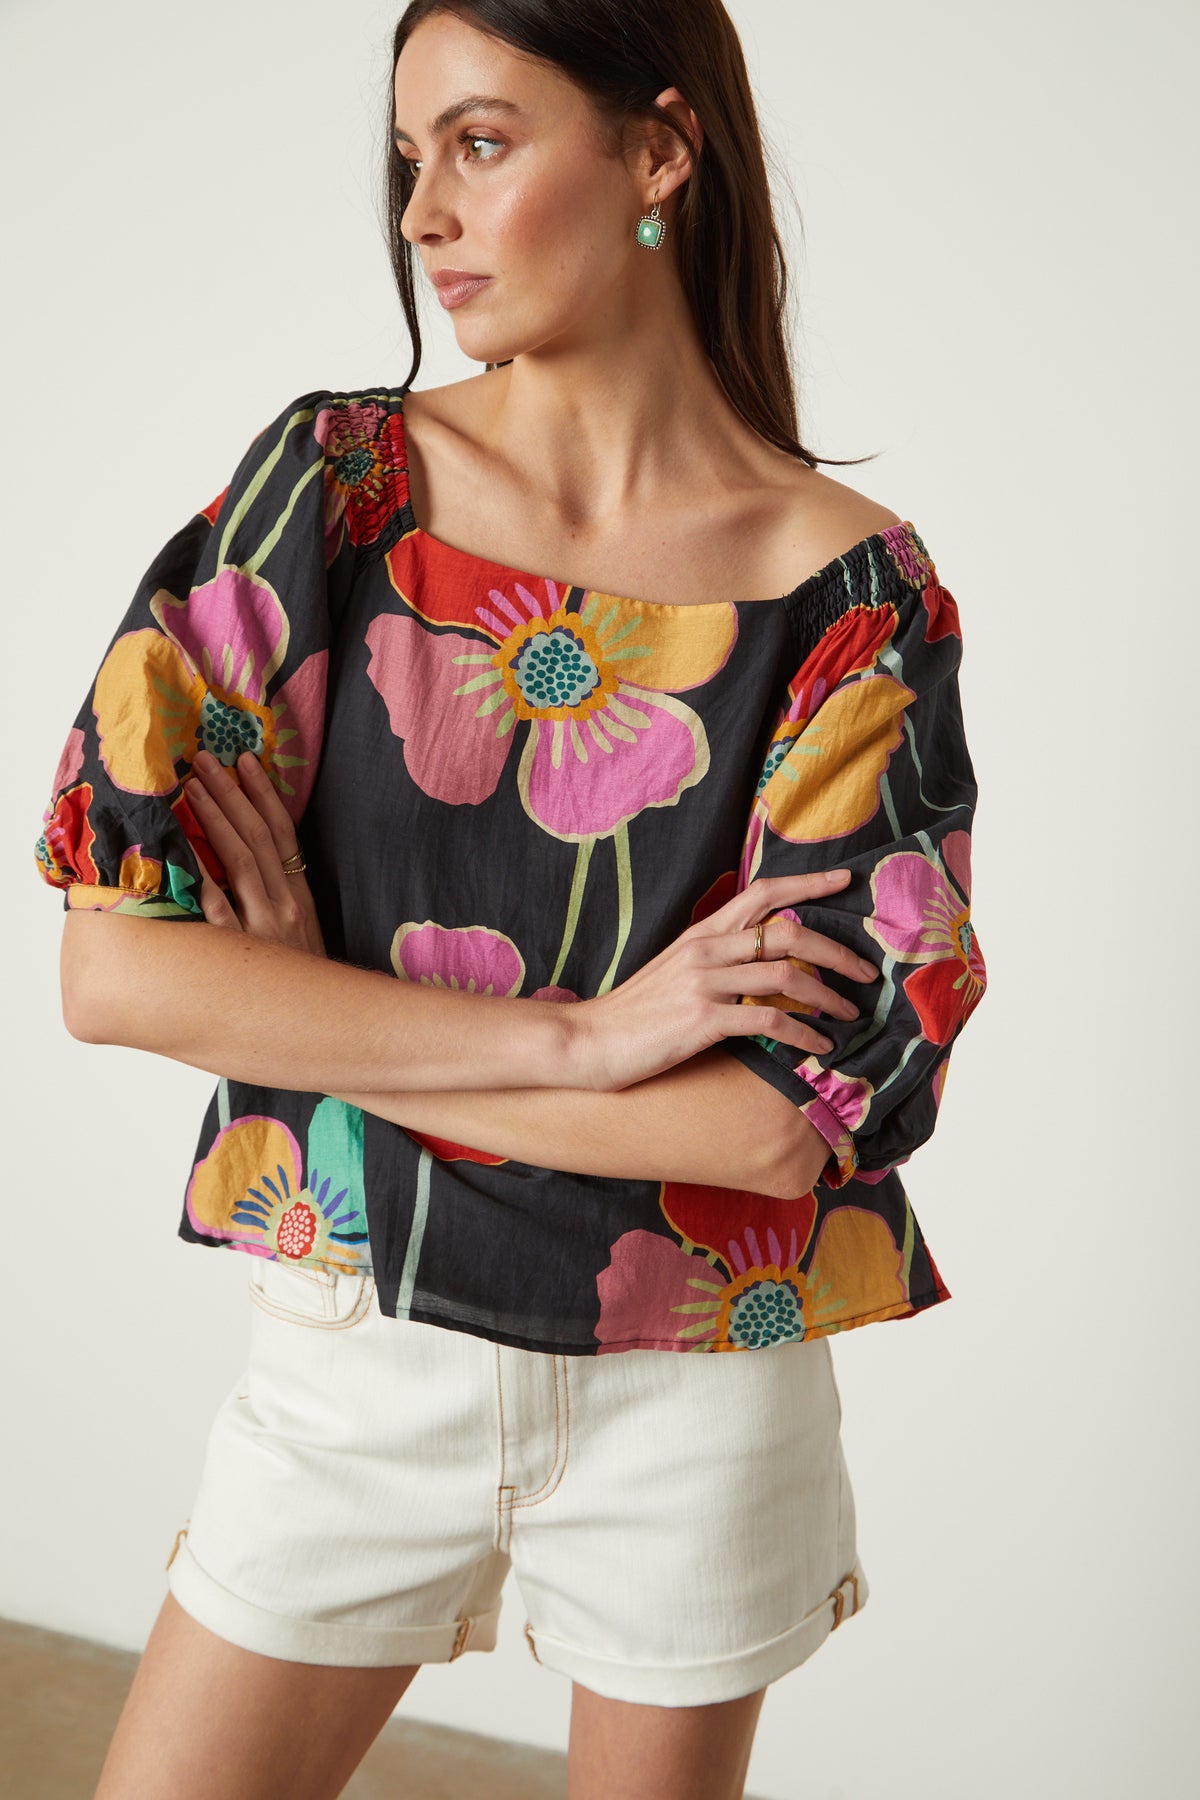   Jasmine Top in bold floral with black background and white denim shorts front close up woman arms folded in front 